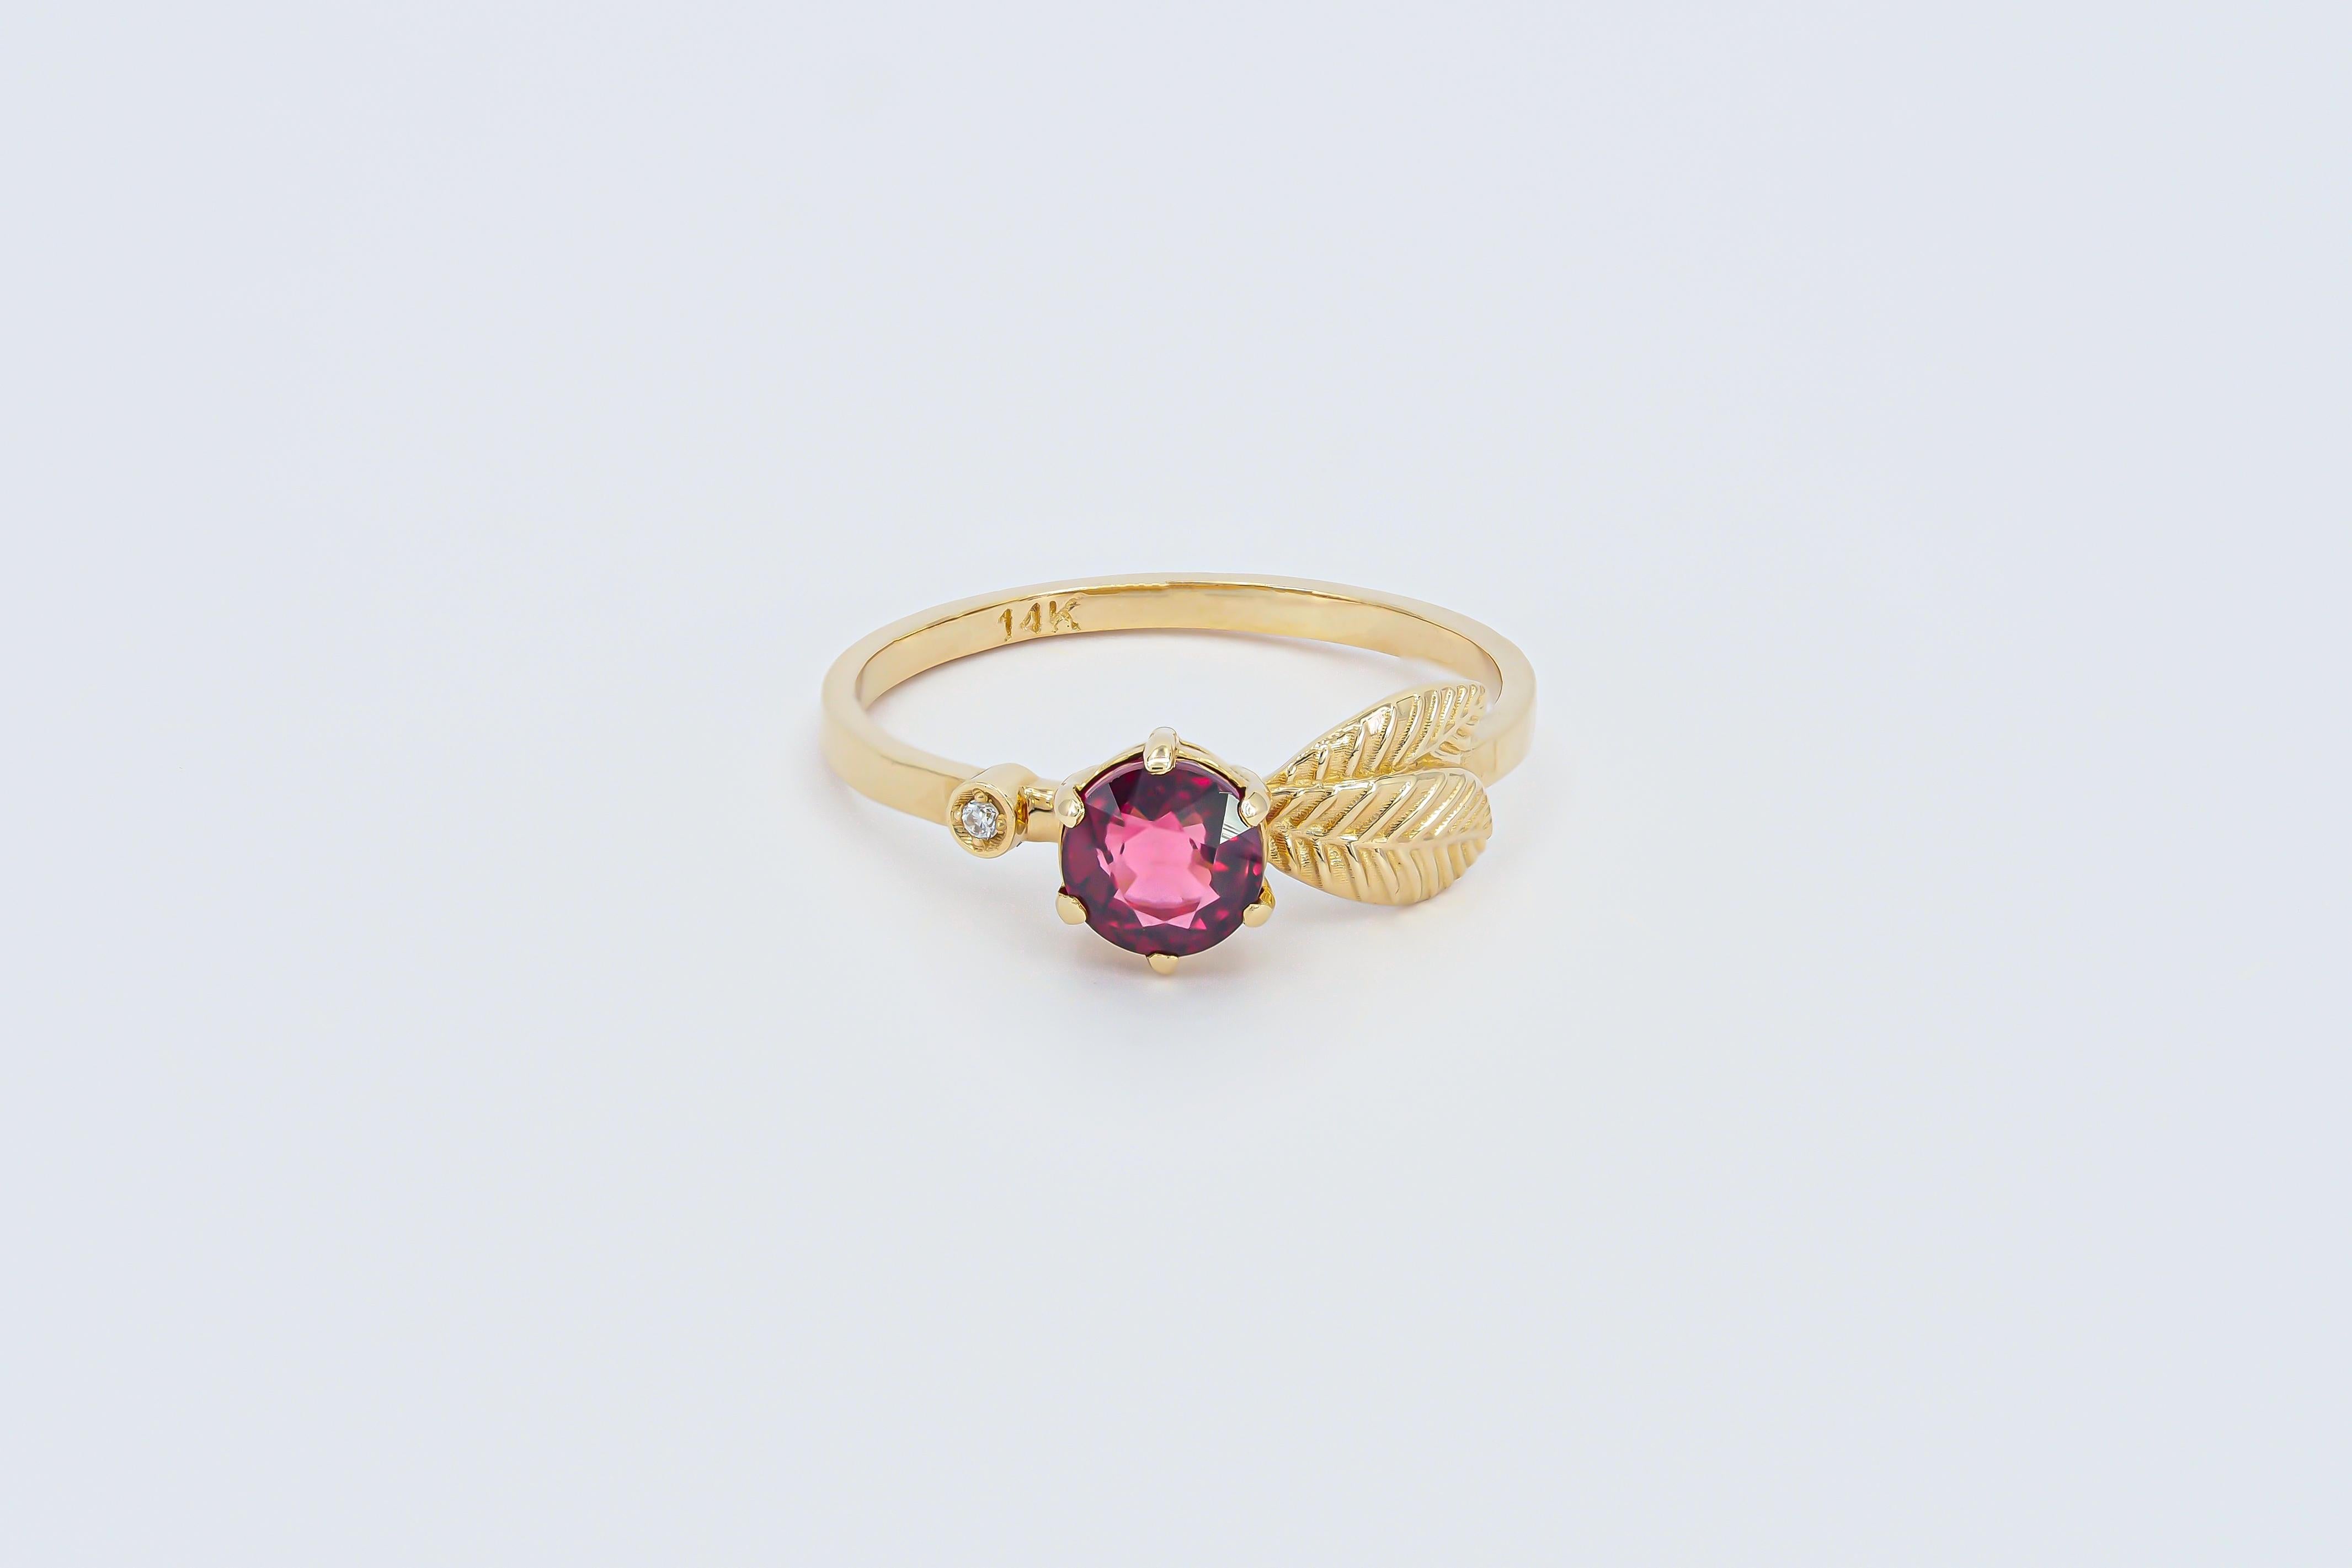 For Sale:  14k Gold Ring with Garnet and Diamonds 2